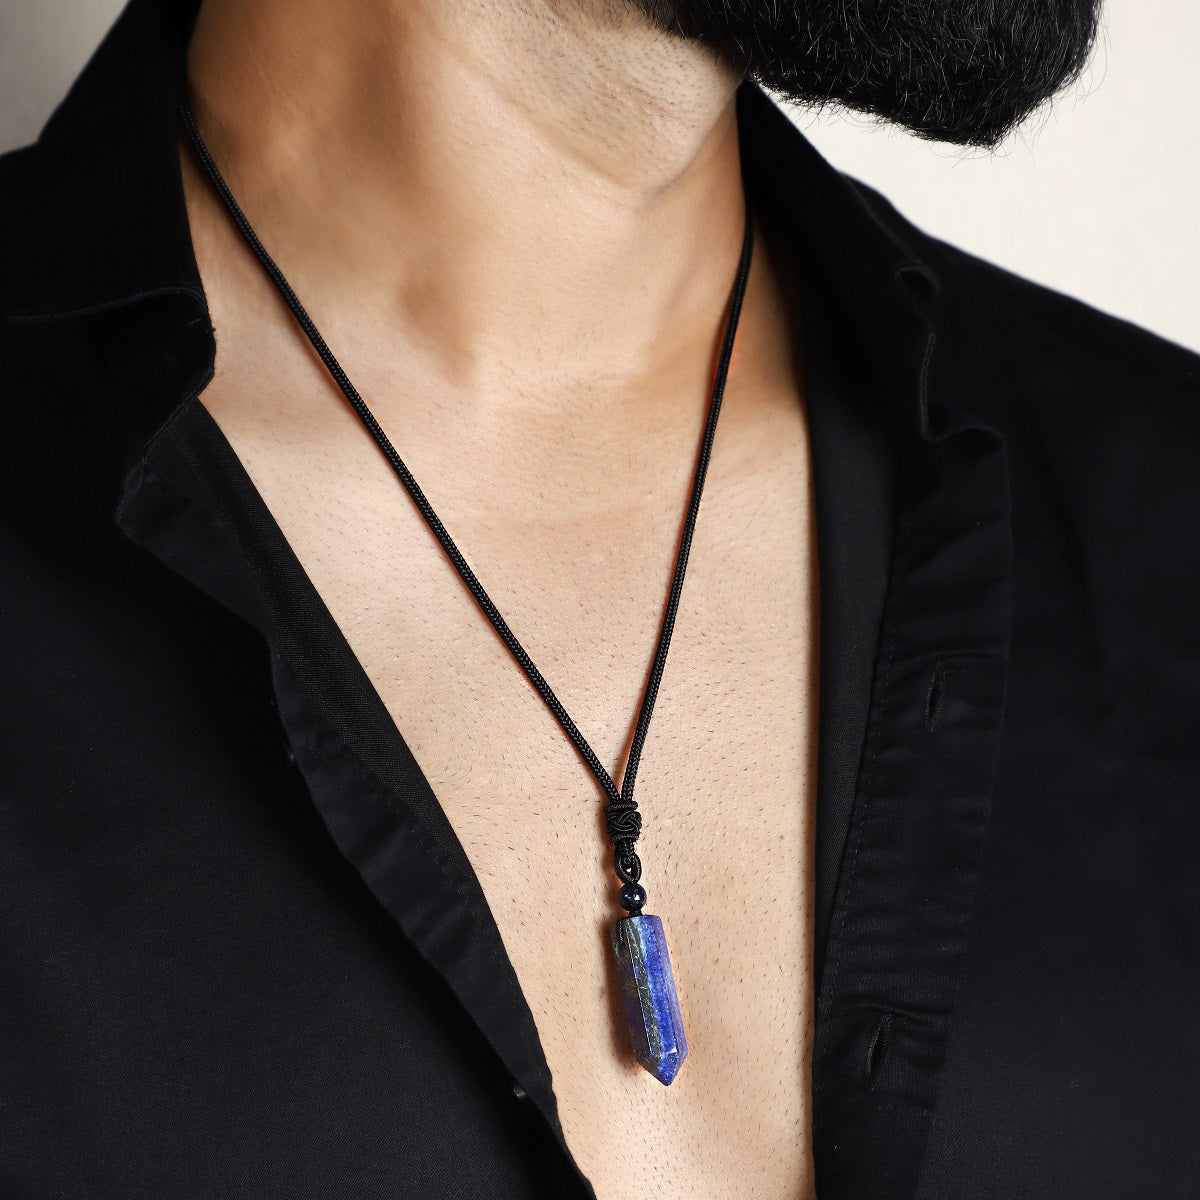 A stunning pendant necklace featuring a natural Lapis Lazuli gemstone wrapped in an intricate design.